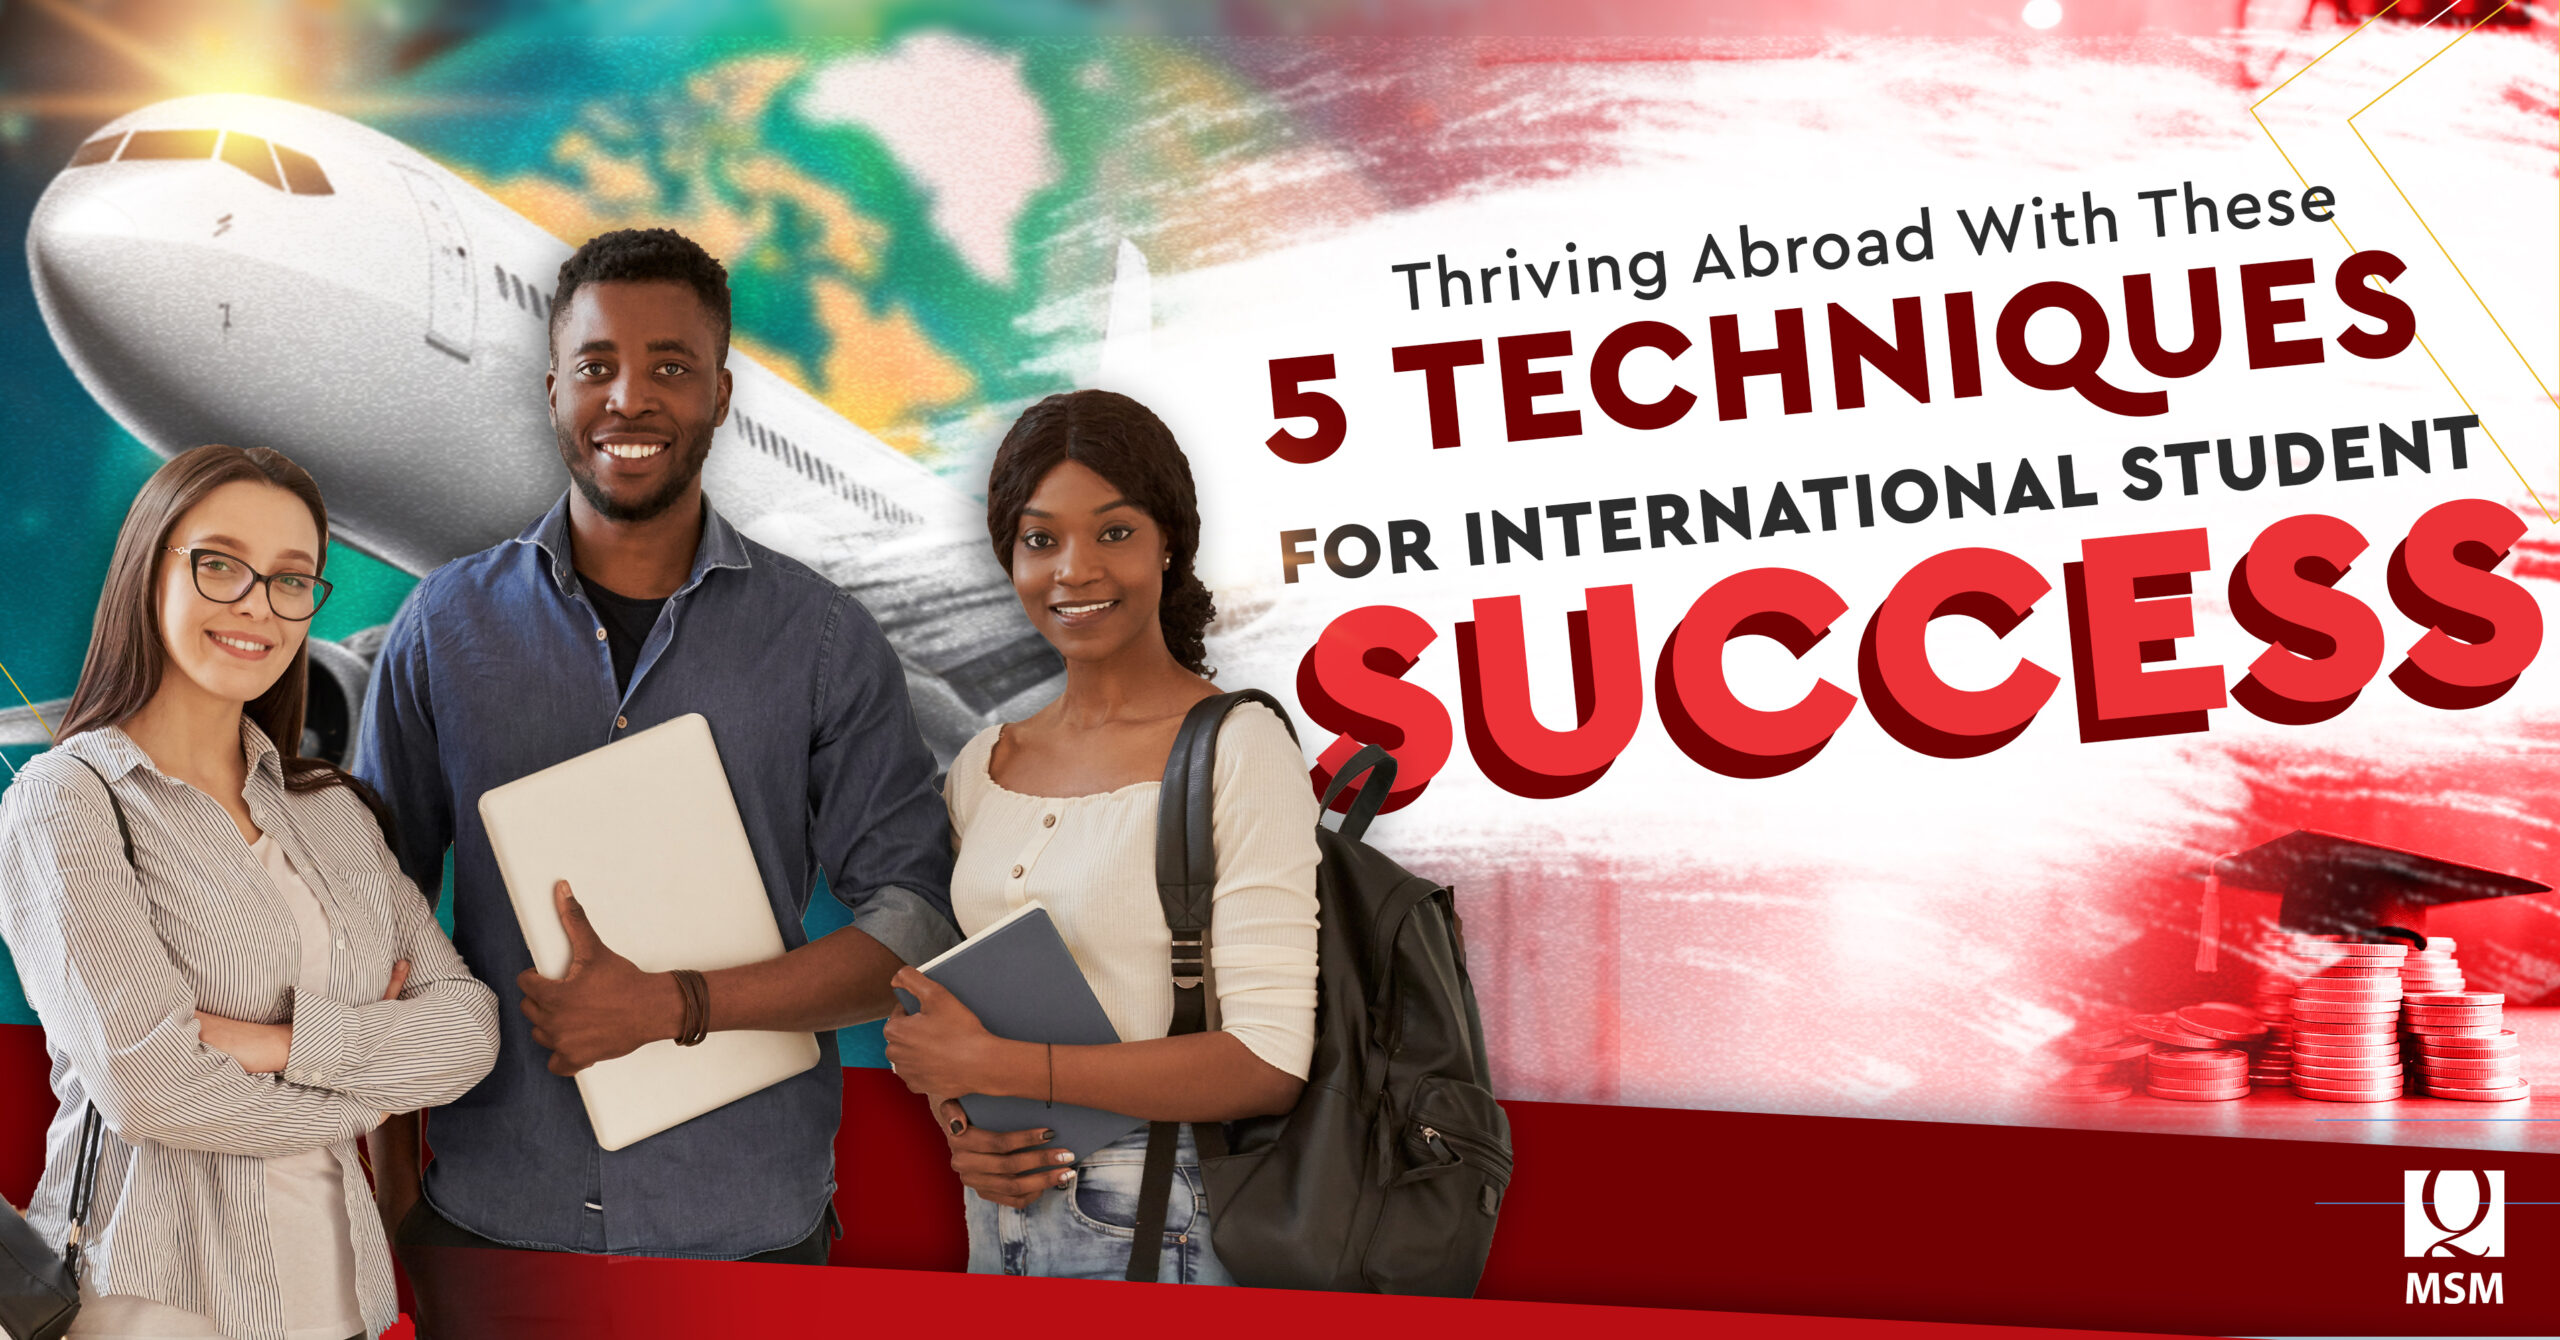 Thriving Abroad With These 5 Techniques for International Student Success